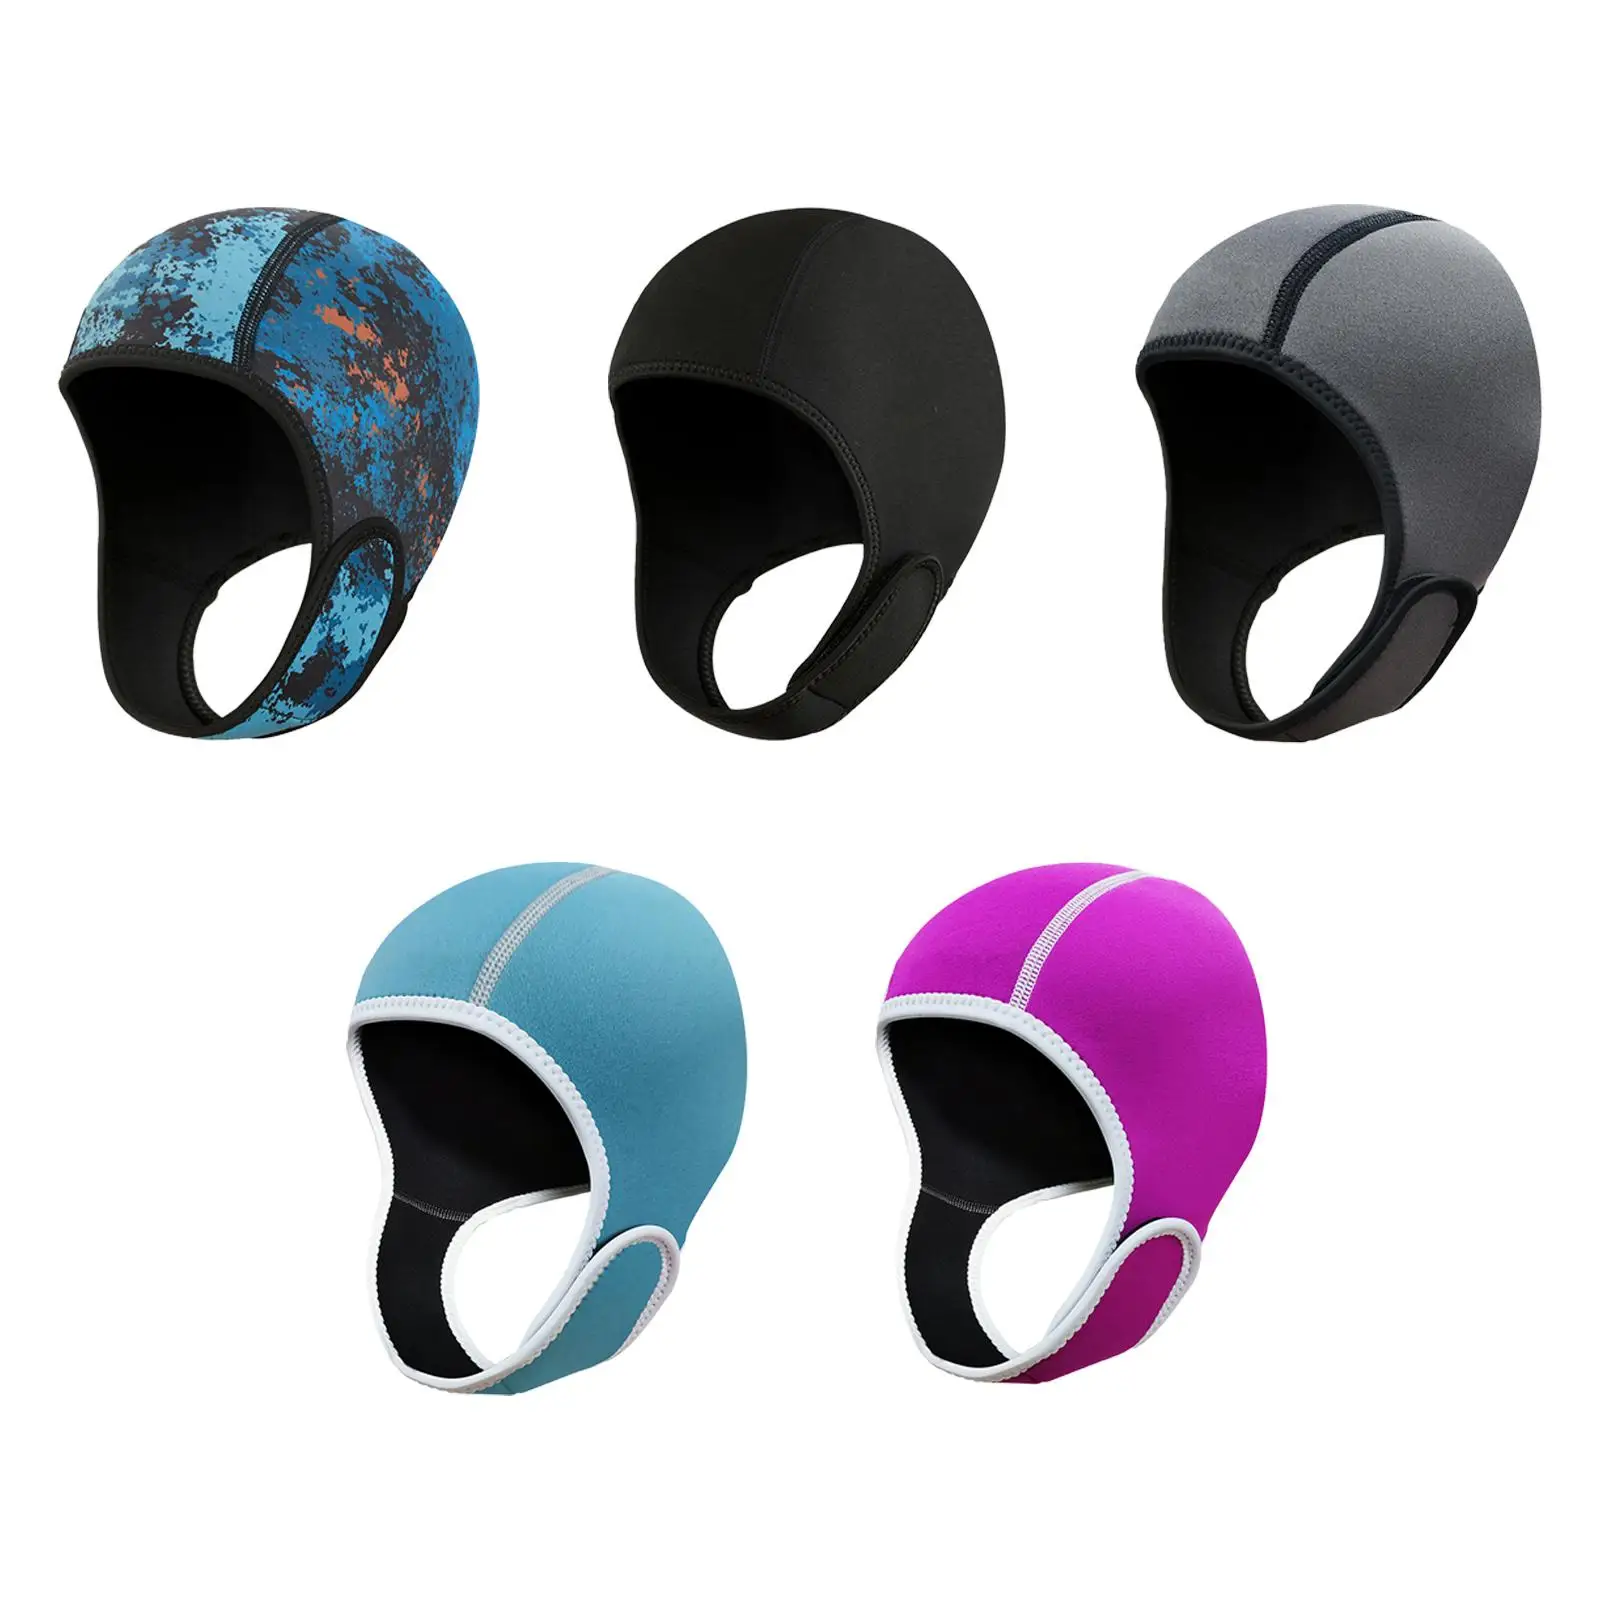 Scuba Diving Hood Head Protection Elastic with Chin Strap 2mm Neoprene Diving Wetsuit Hood for Women Men Surfing Rafting